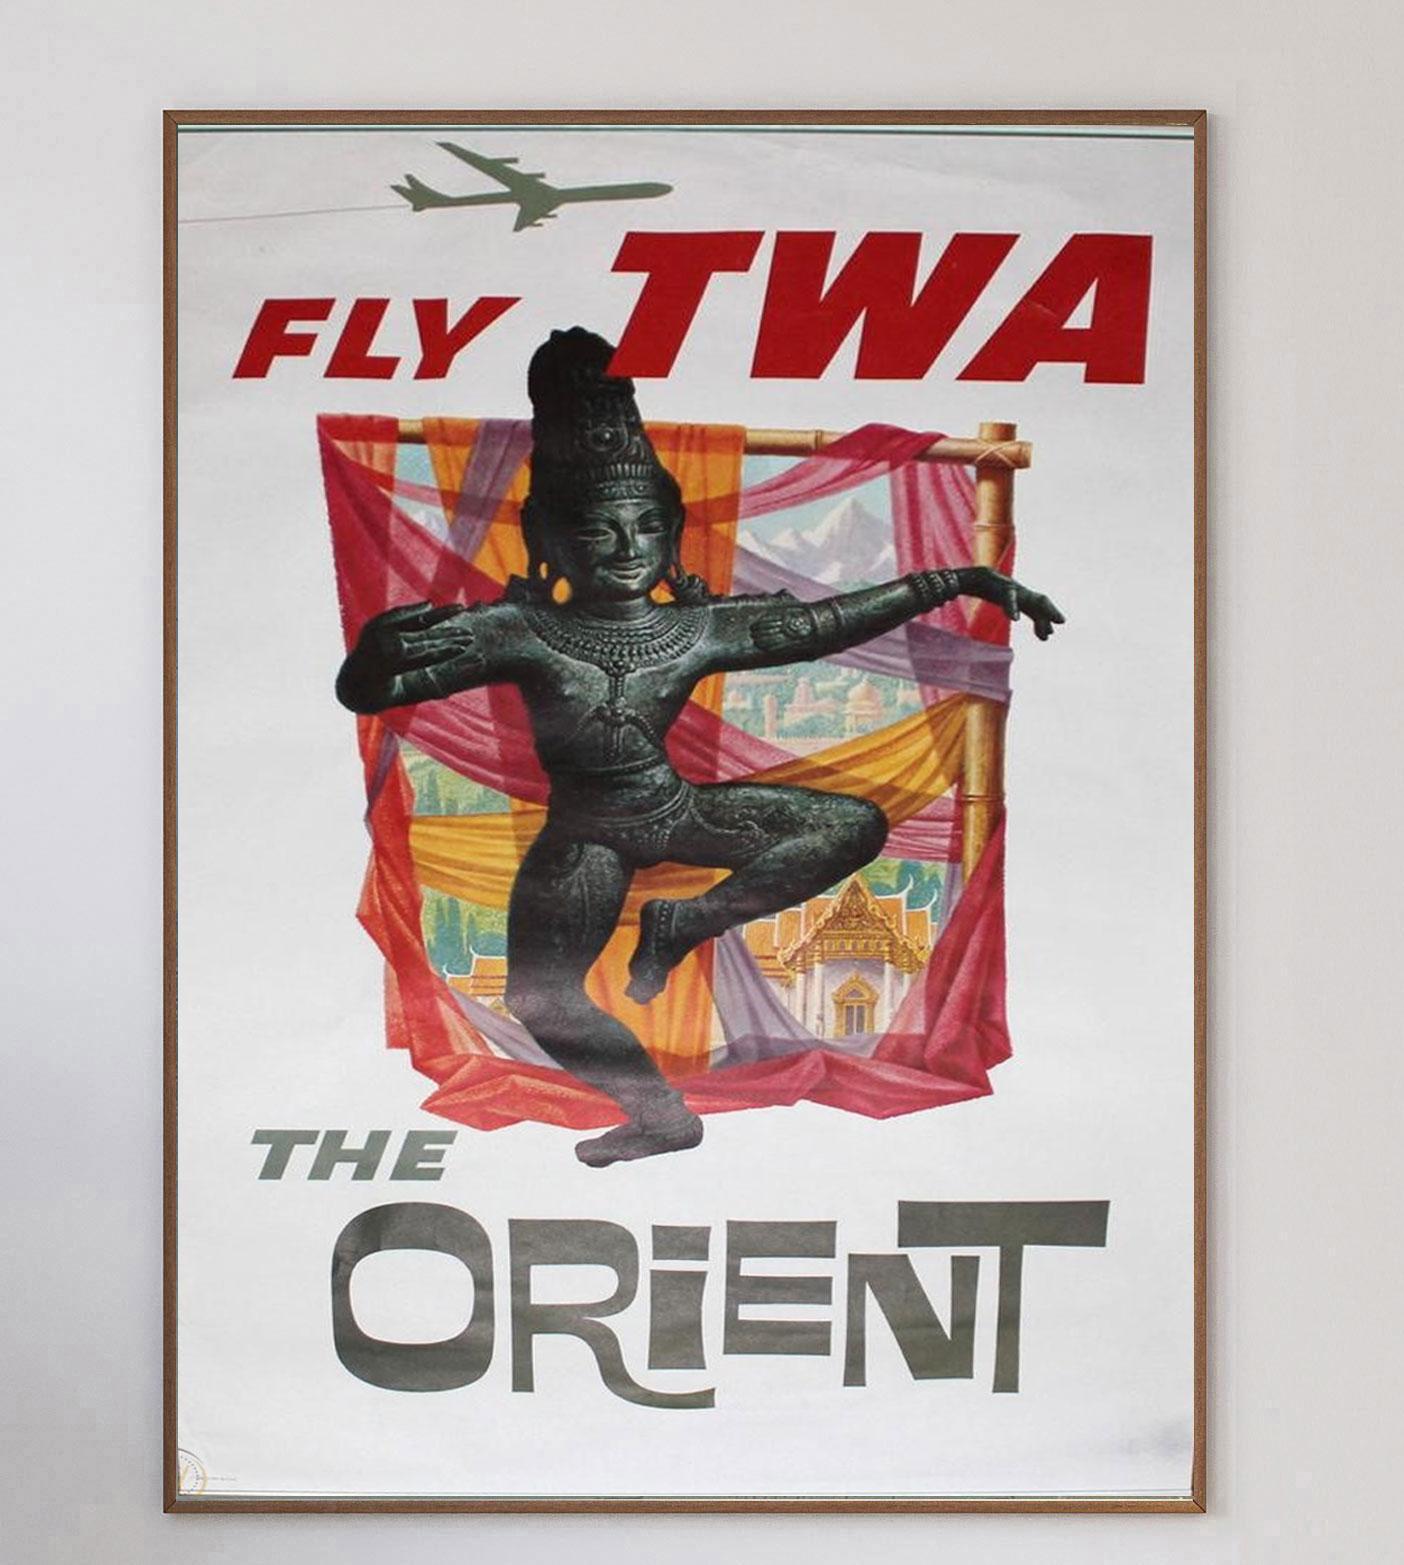 This poster was created in 1959 for Howard Hughes’ Trans World Airlines promoting their routes to The Orient from the USA. Illustrated by influential American artist David Klein, this design features Eastern tropes including the veil drapes and the